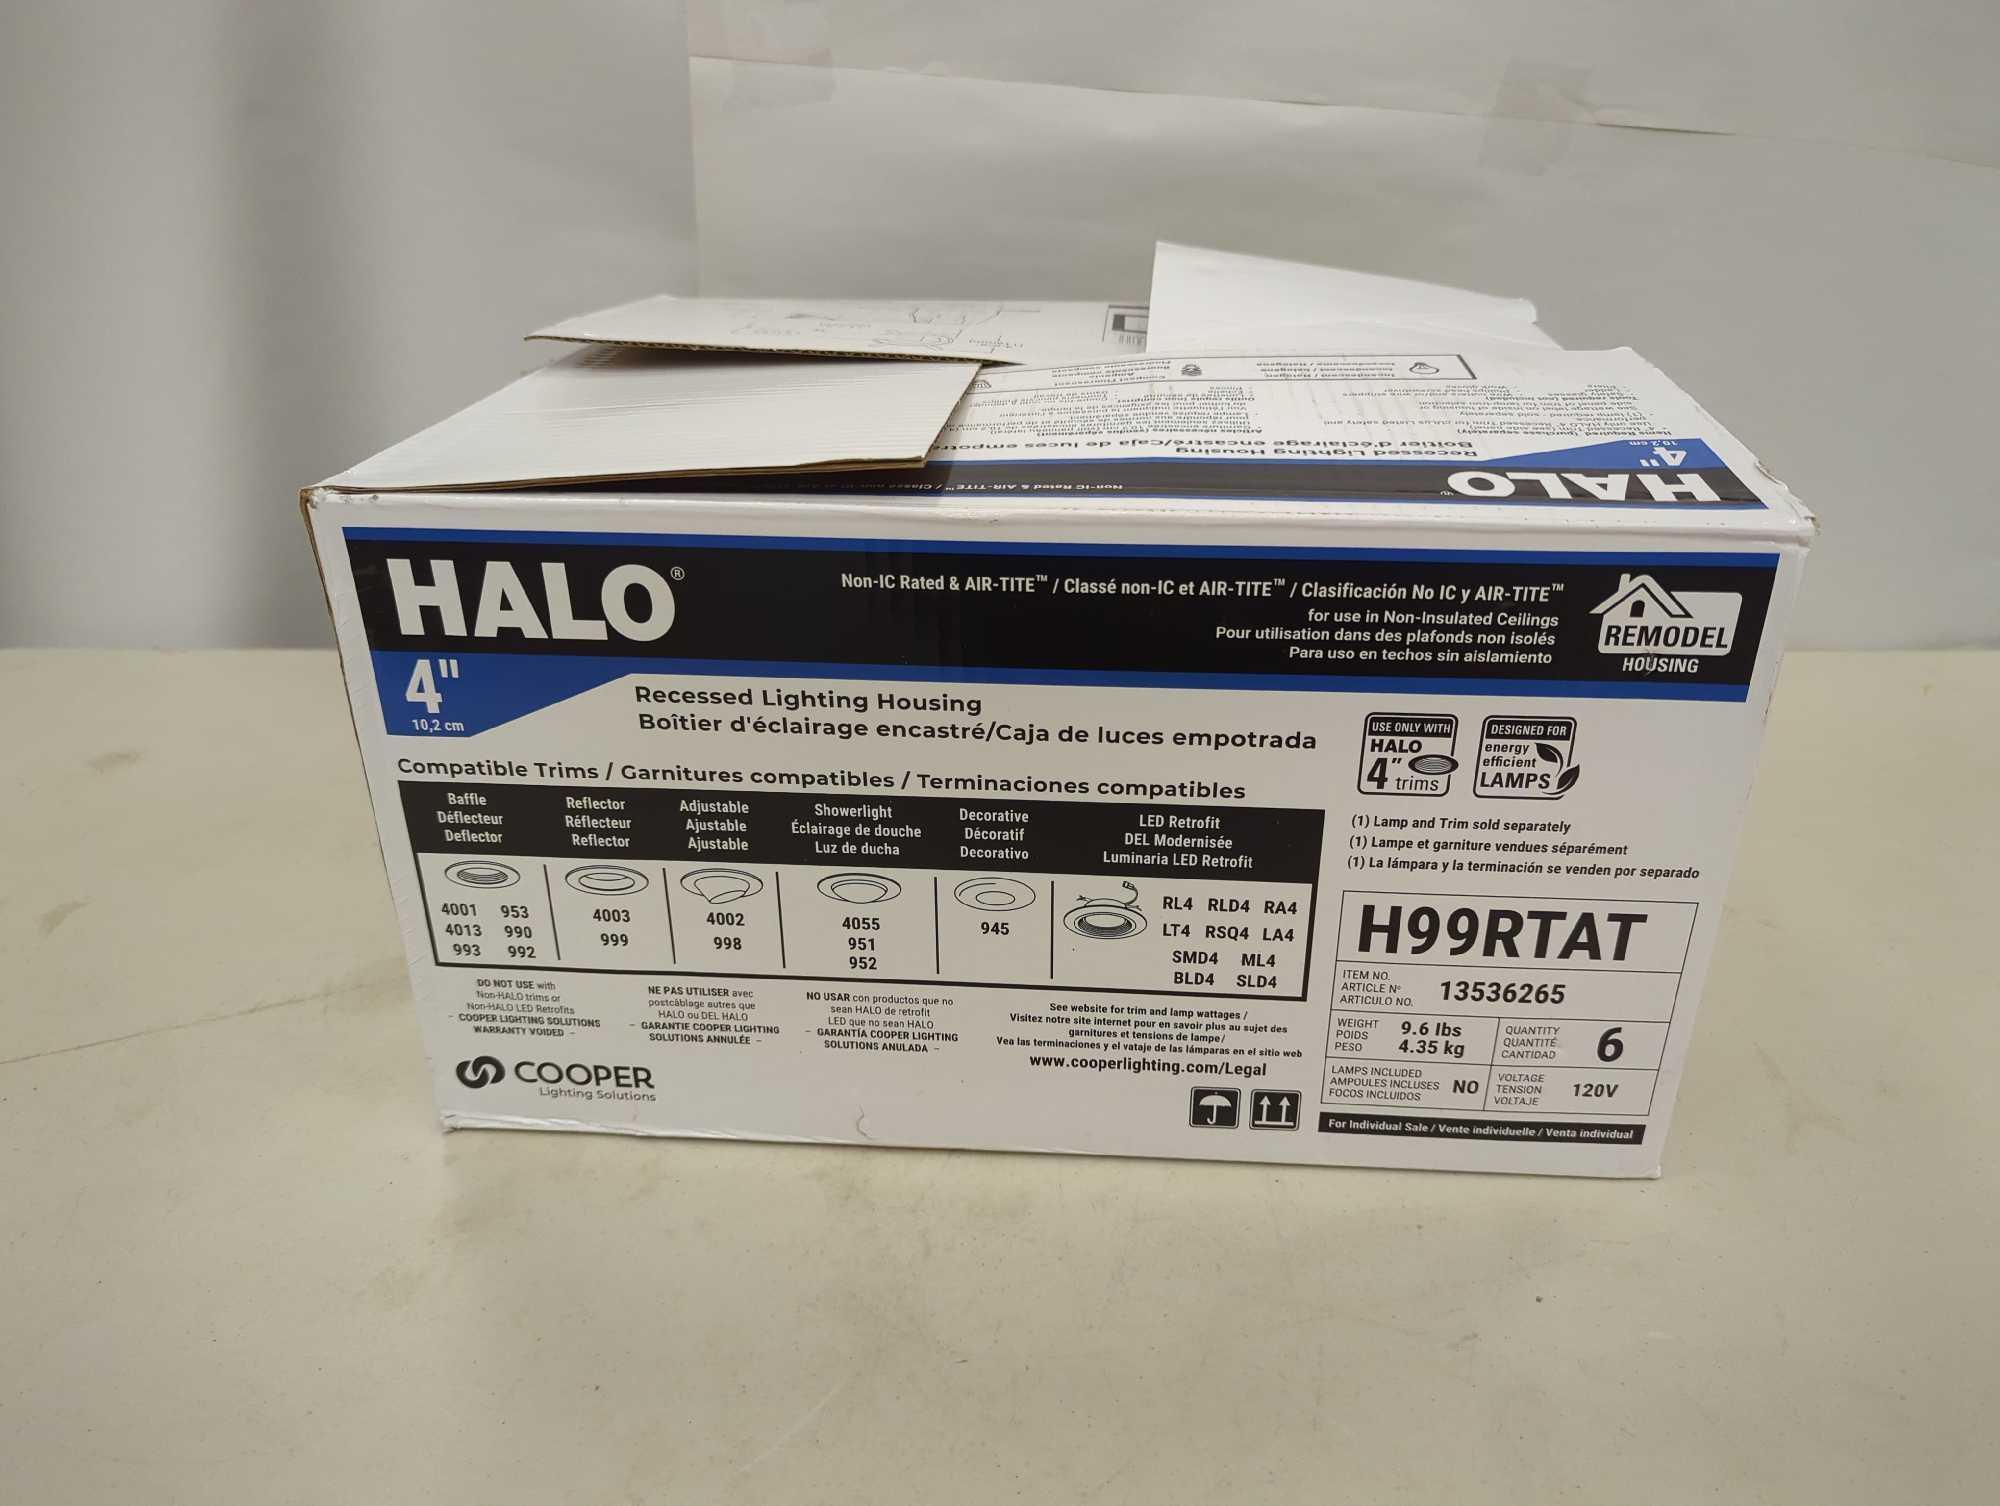 HALO H99RTAT 4 in. Steel Recessed Lighting Housing for Remodel Ceiling, No Insulation Contact,